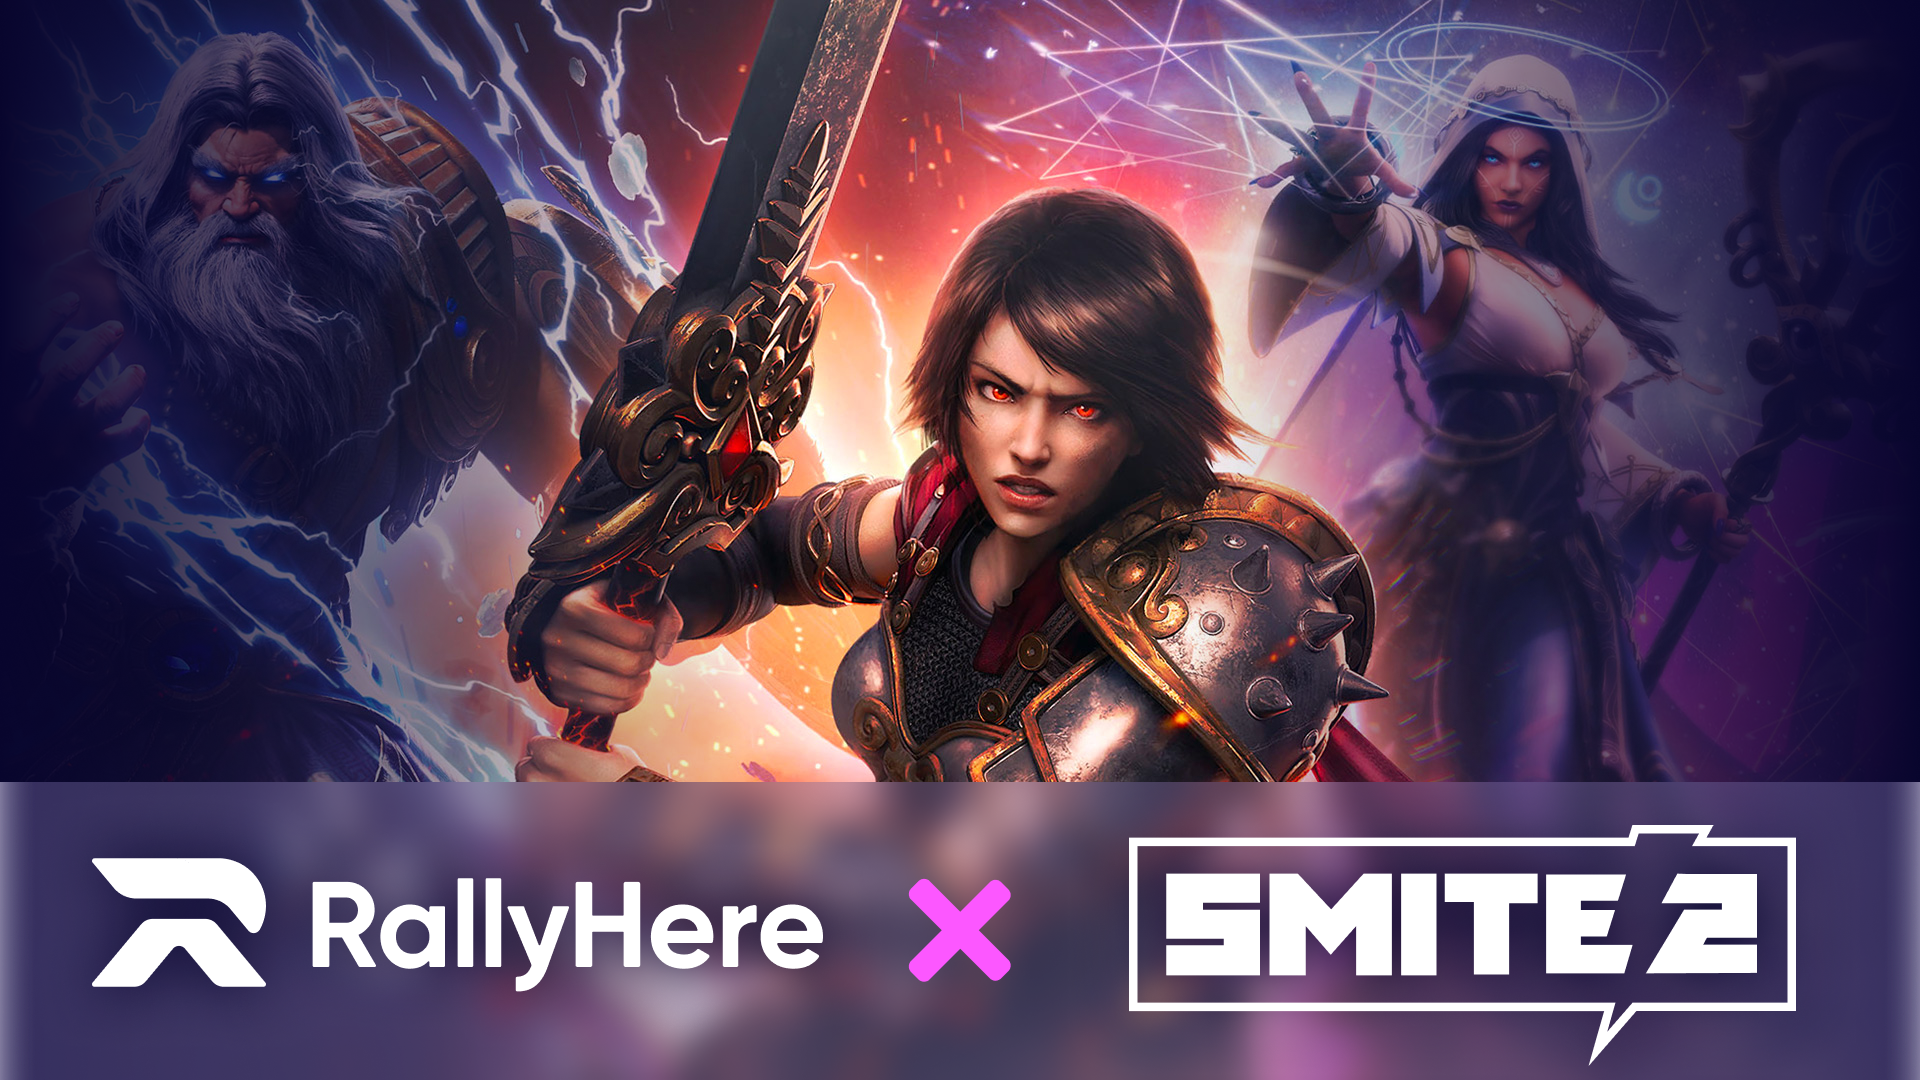 Featured Image: RallyHere announces partnership with Titan Forge Games to provide live-service support for cross-platform MOBA sequel, SMITE 2